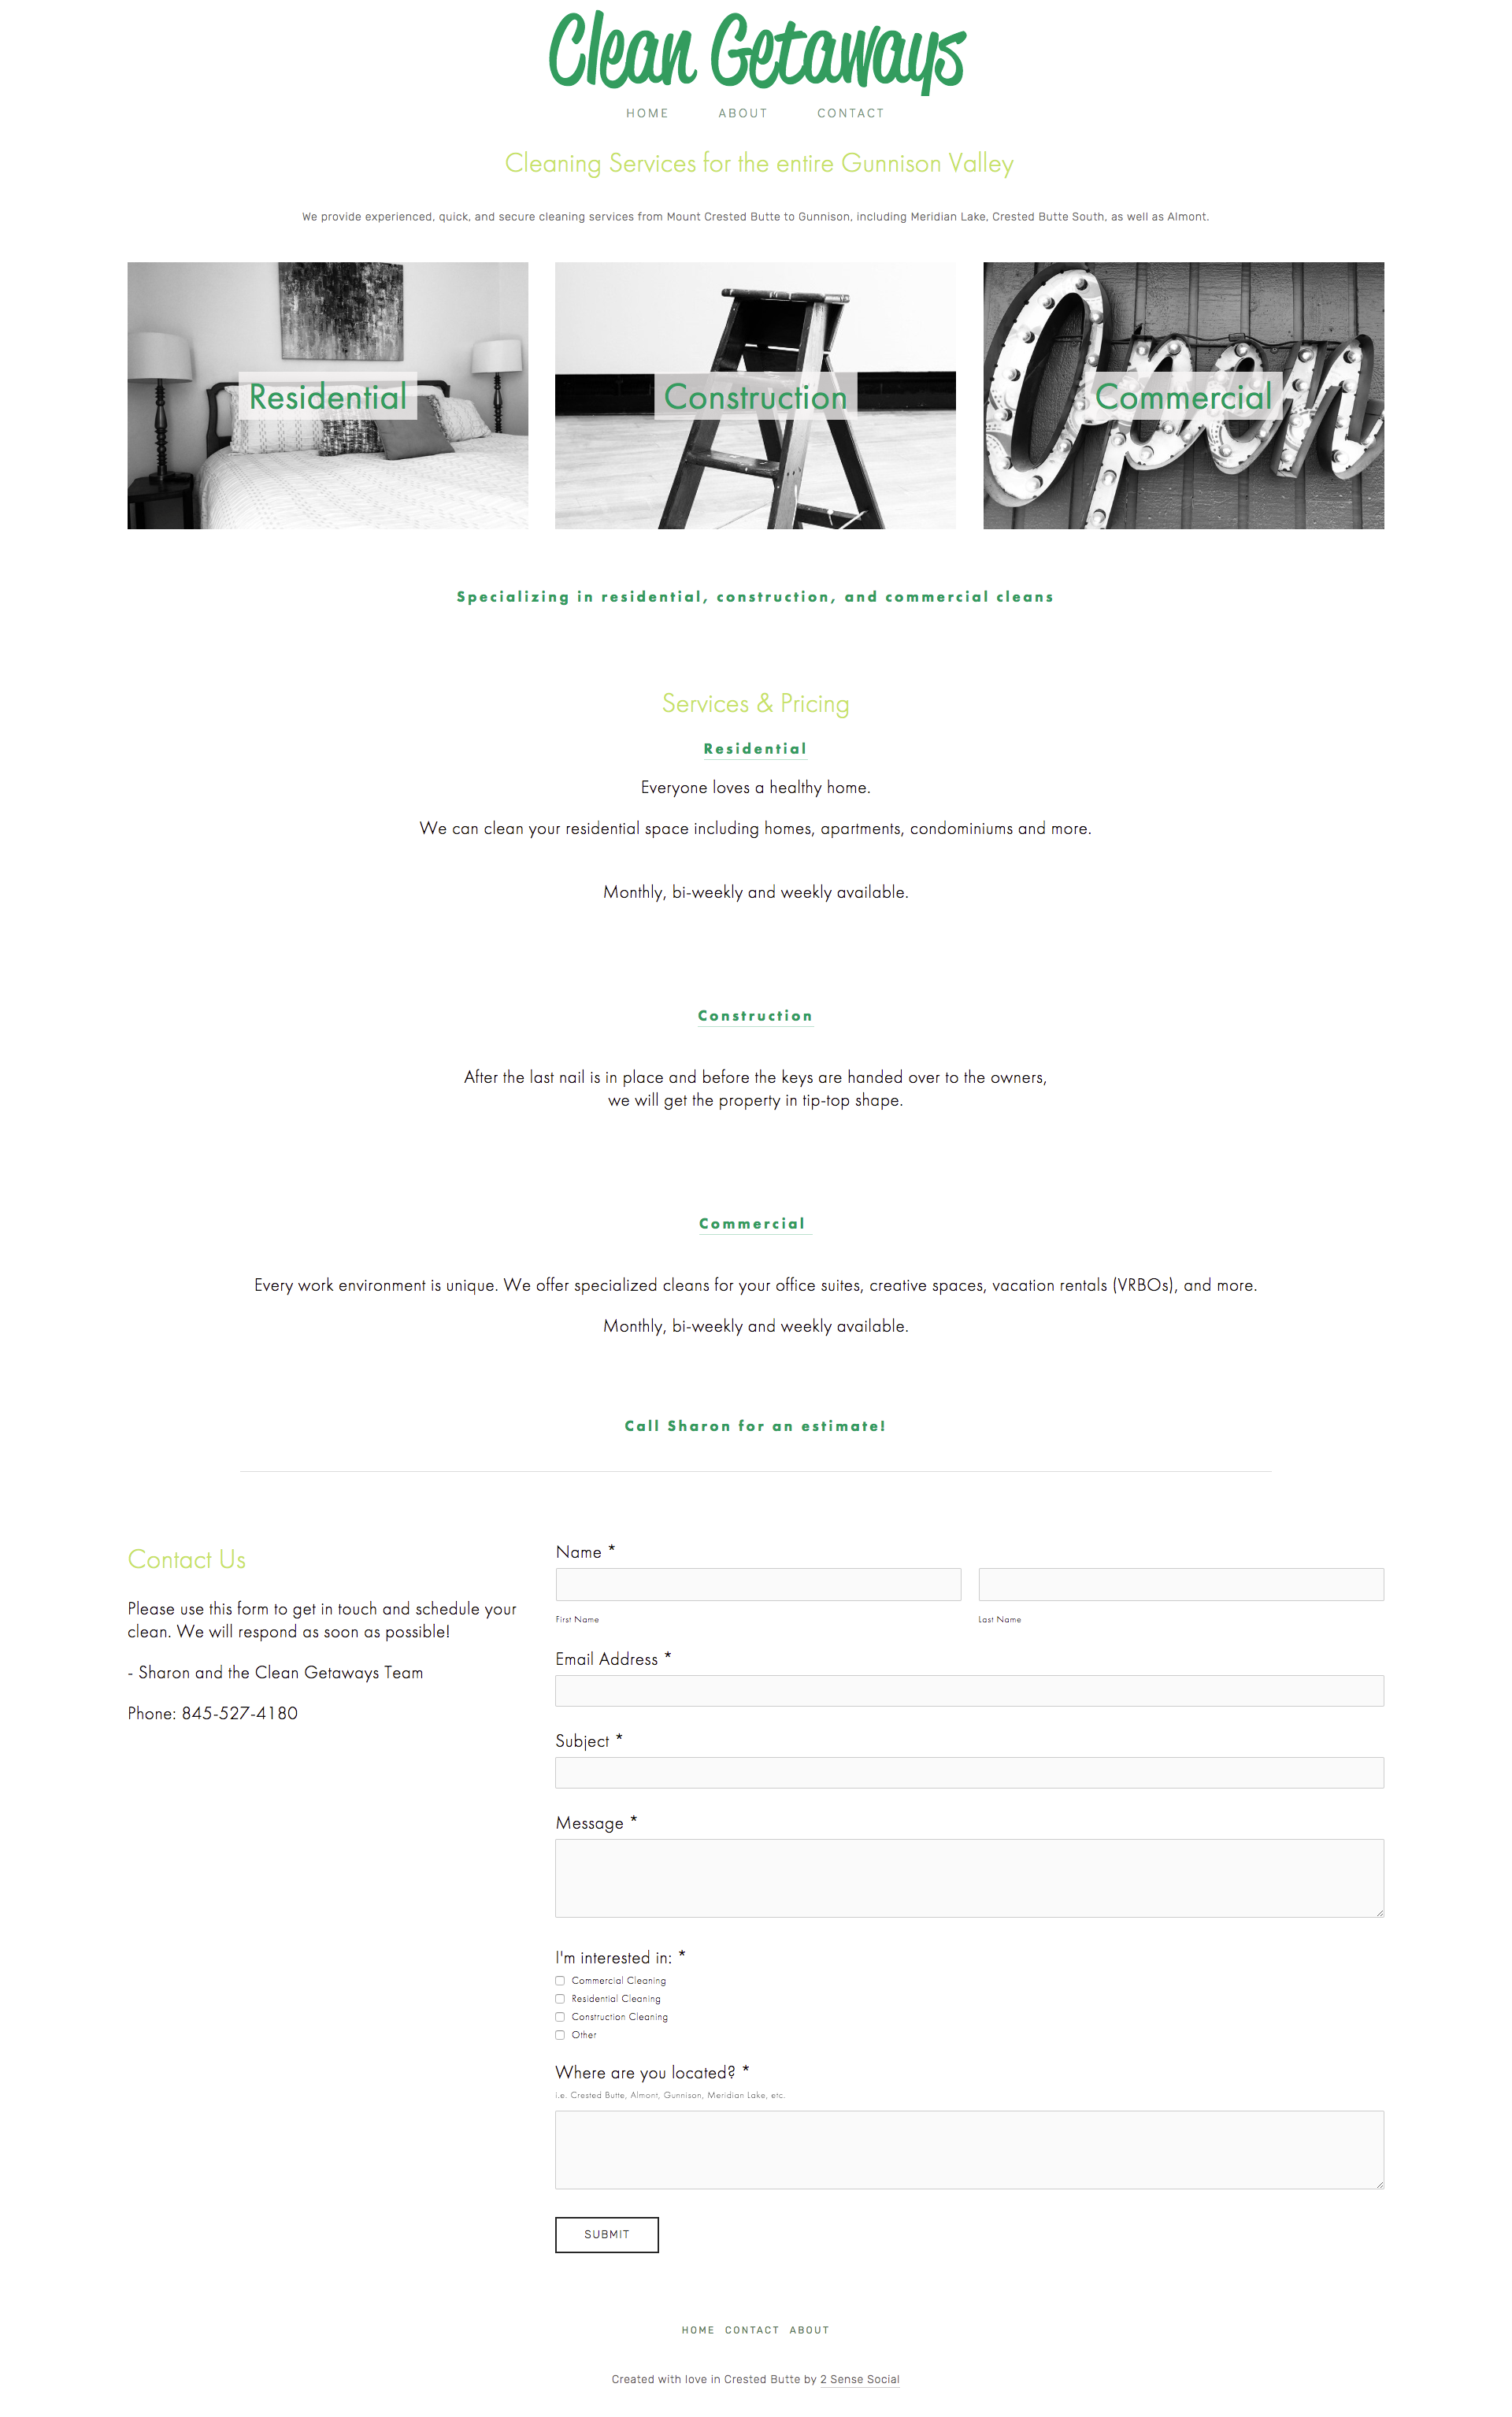 Local Cleaning Service Website Design